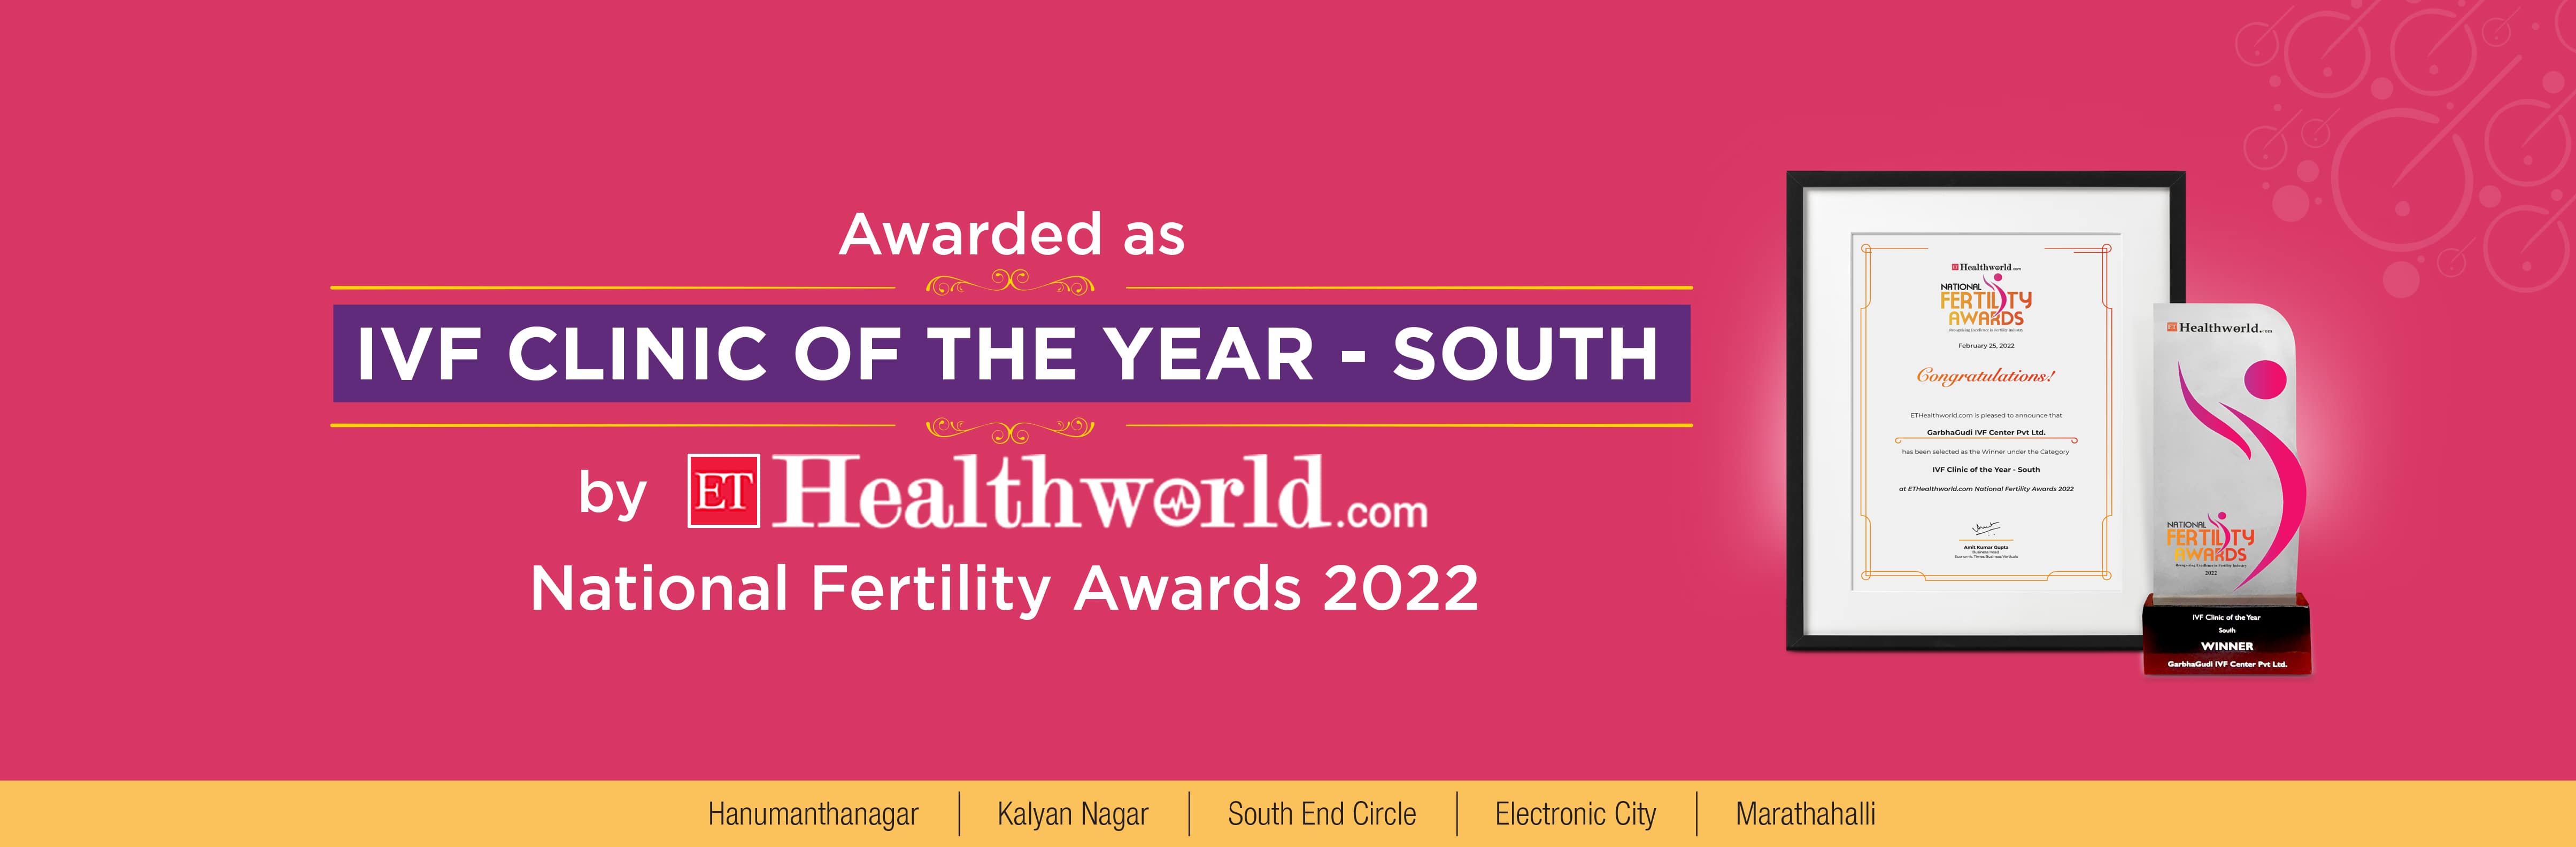 Best IVF Clinic of the Year - South